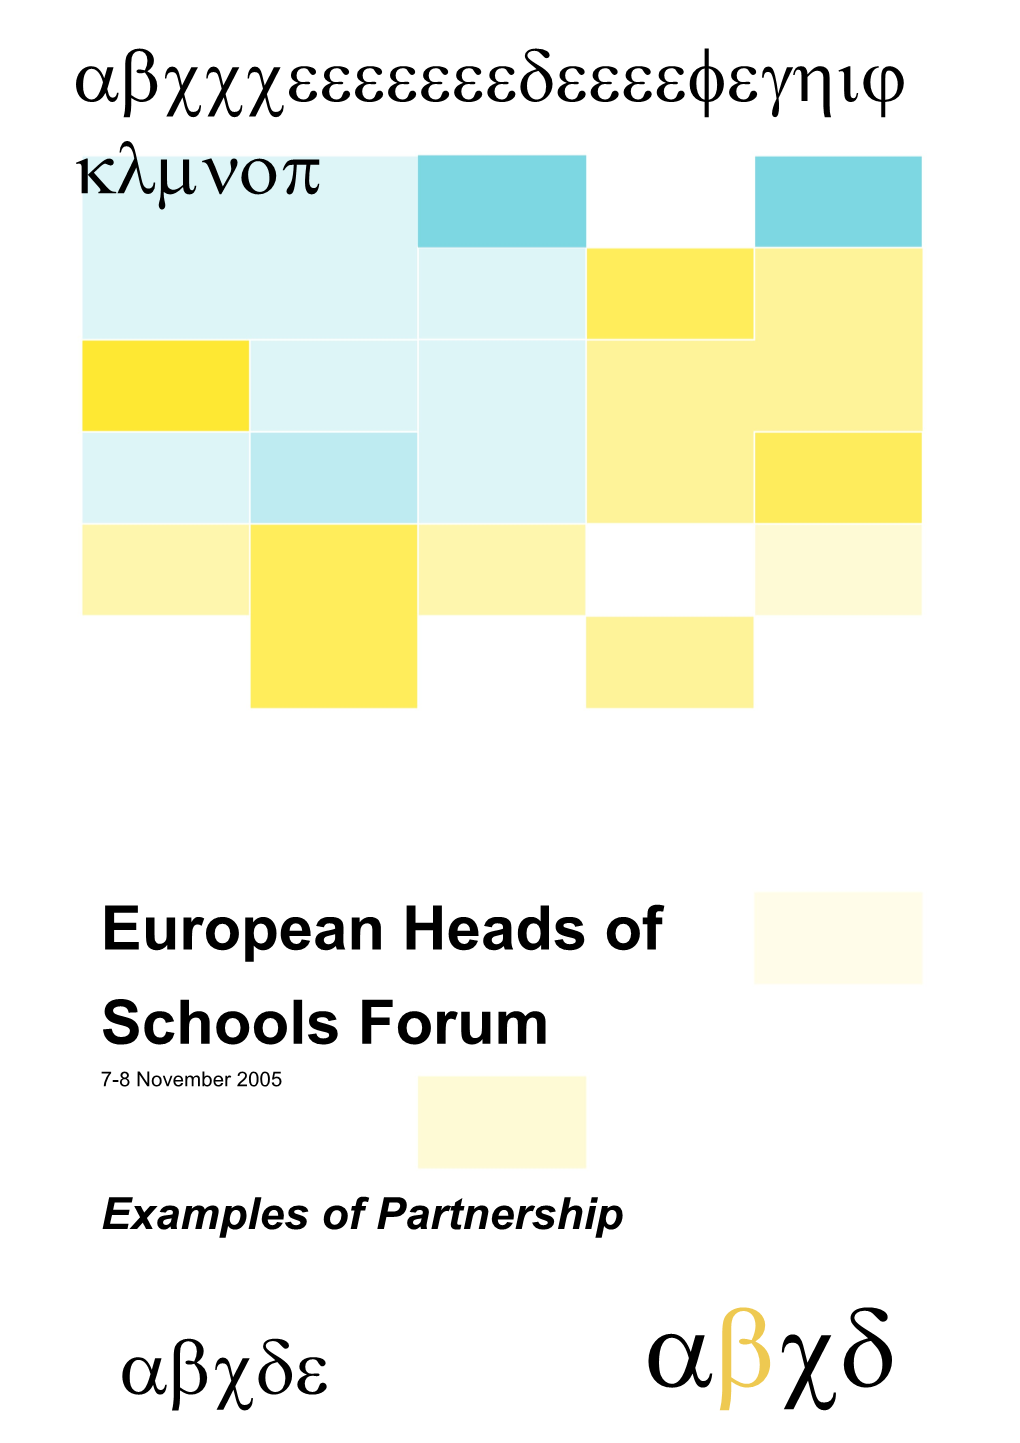 How European Schools of Public Administration Can and Do Work Both Together and with Other